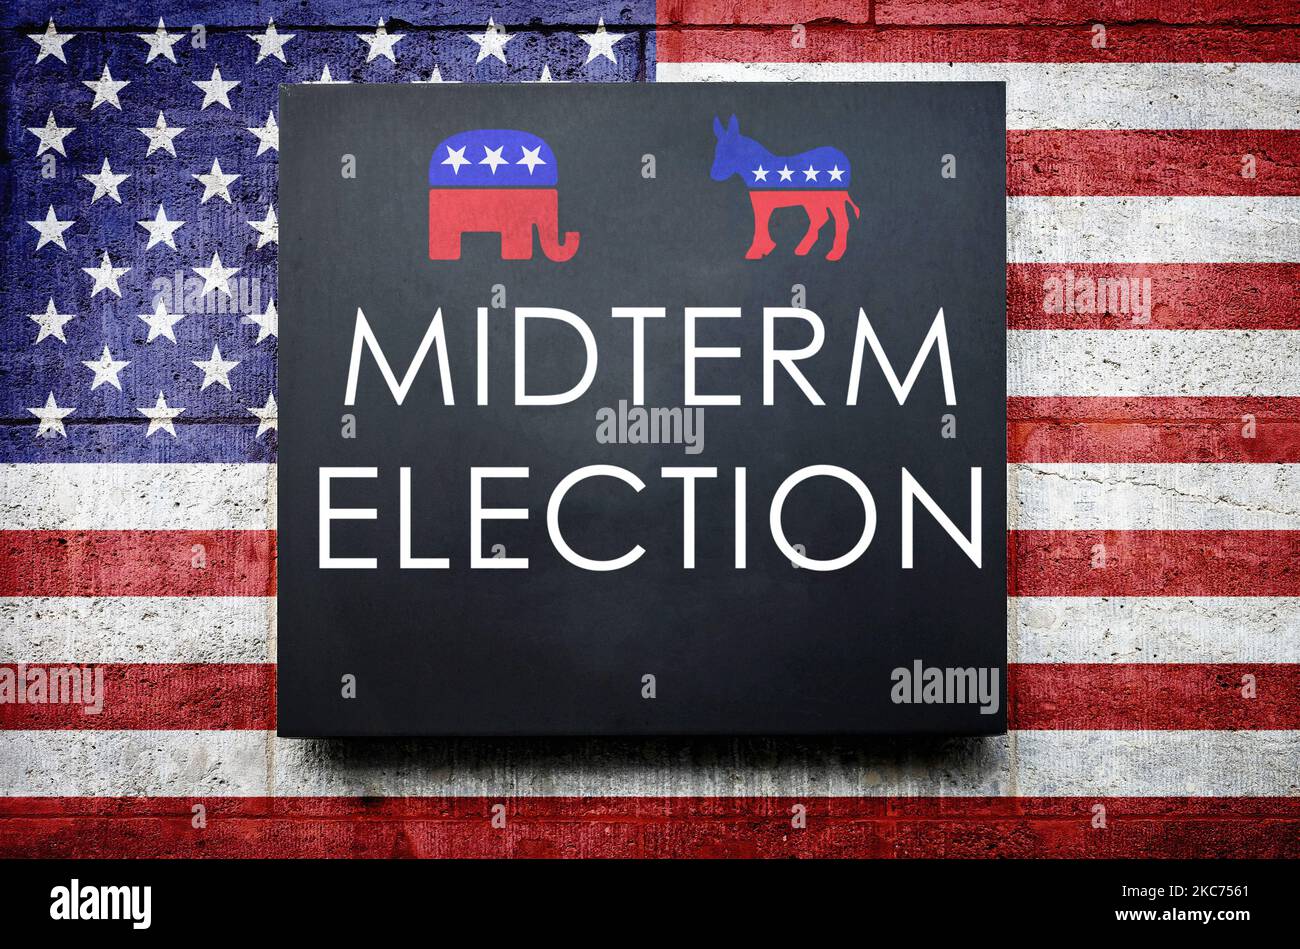 Midterm Election in USA Stock Photo